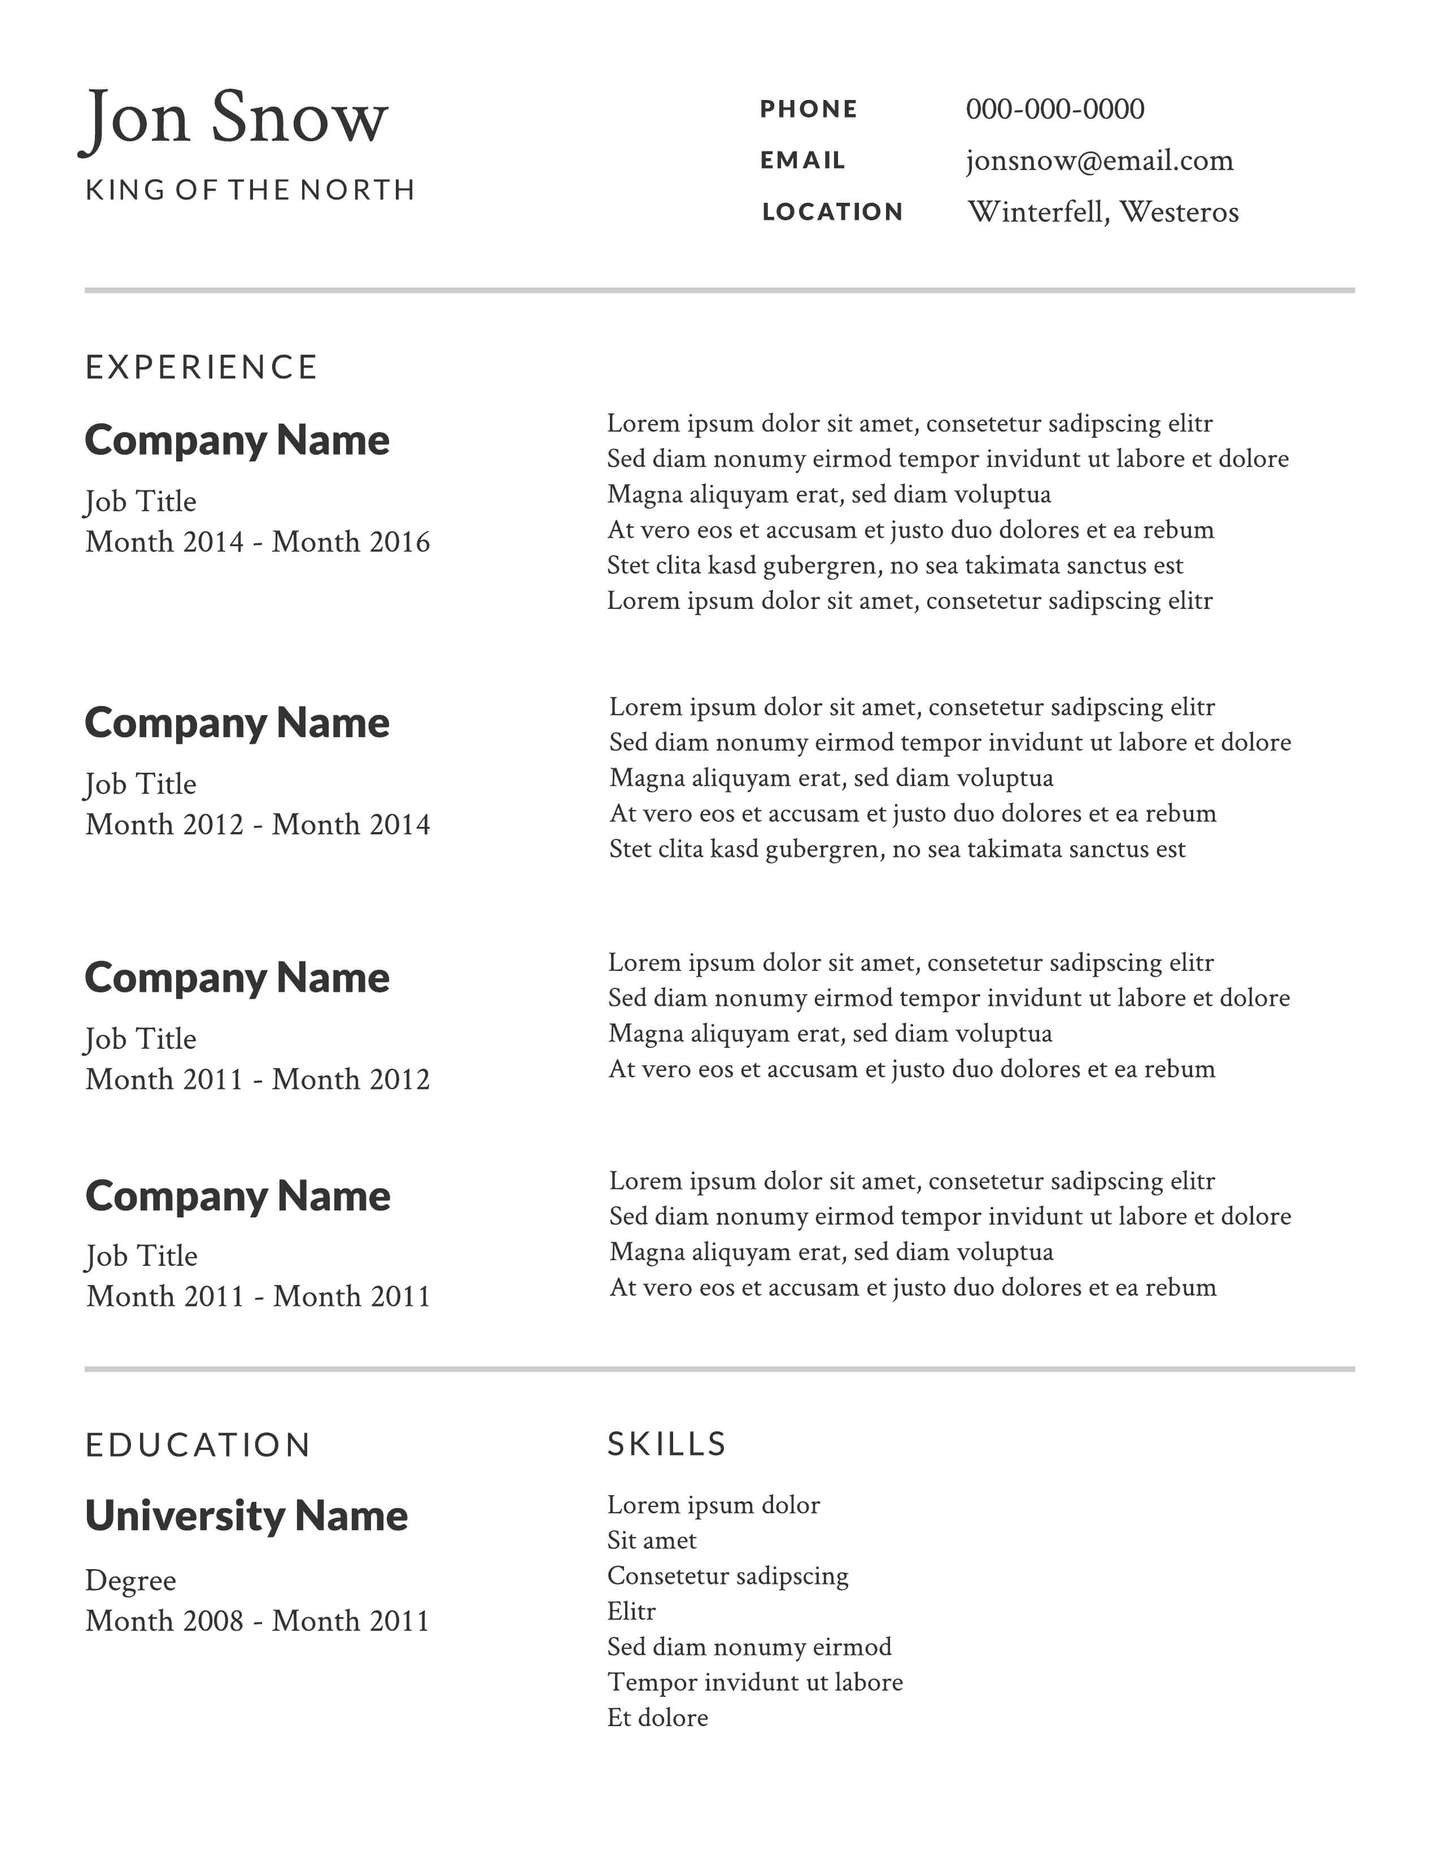 2 Free Resume Templates & Examples Lucidpress